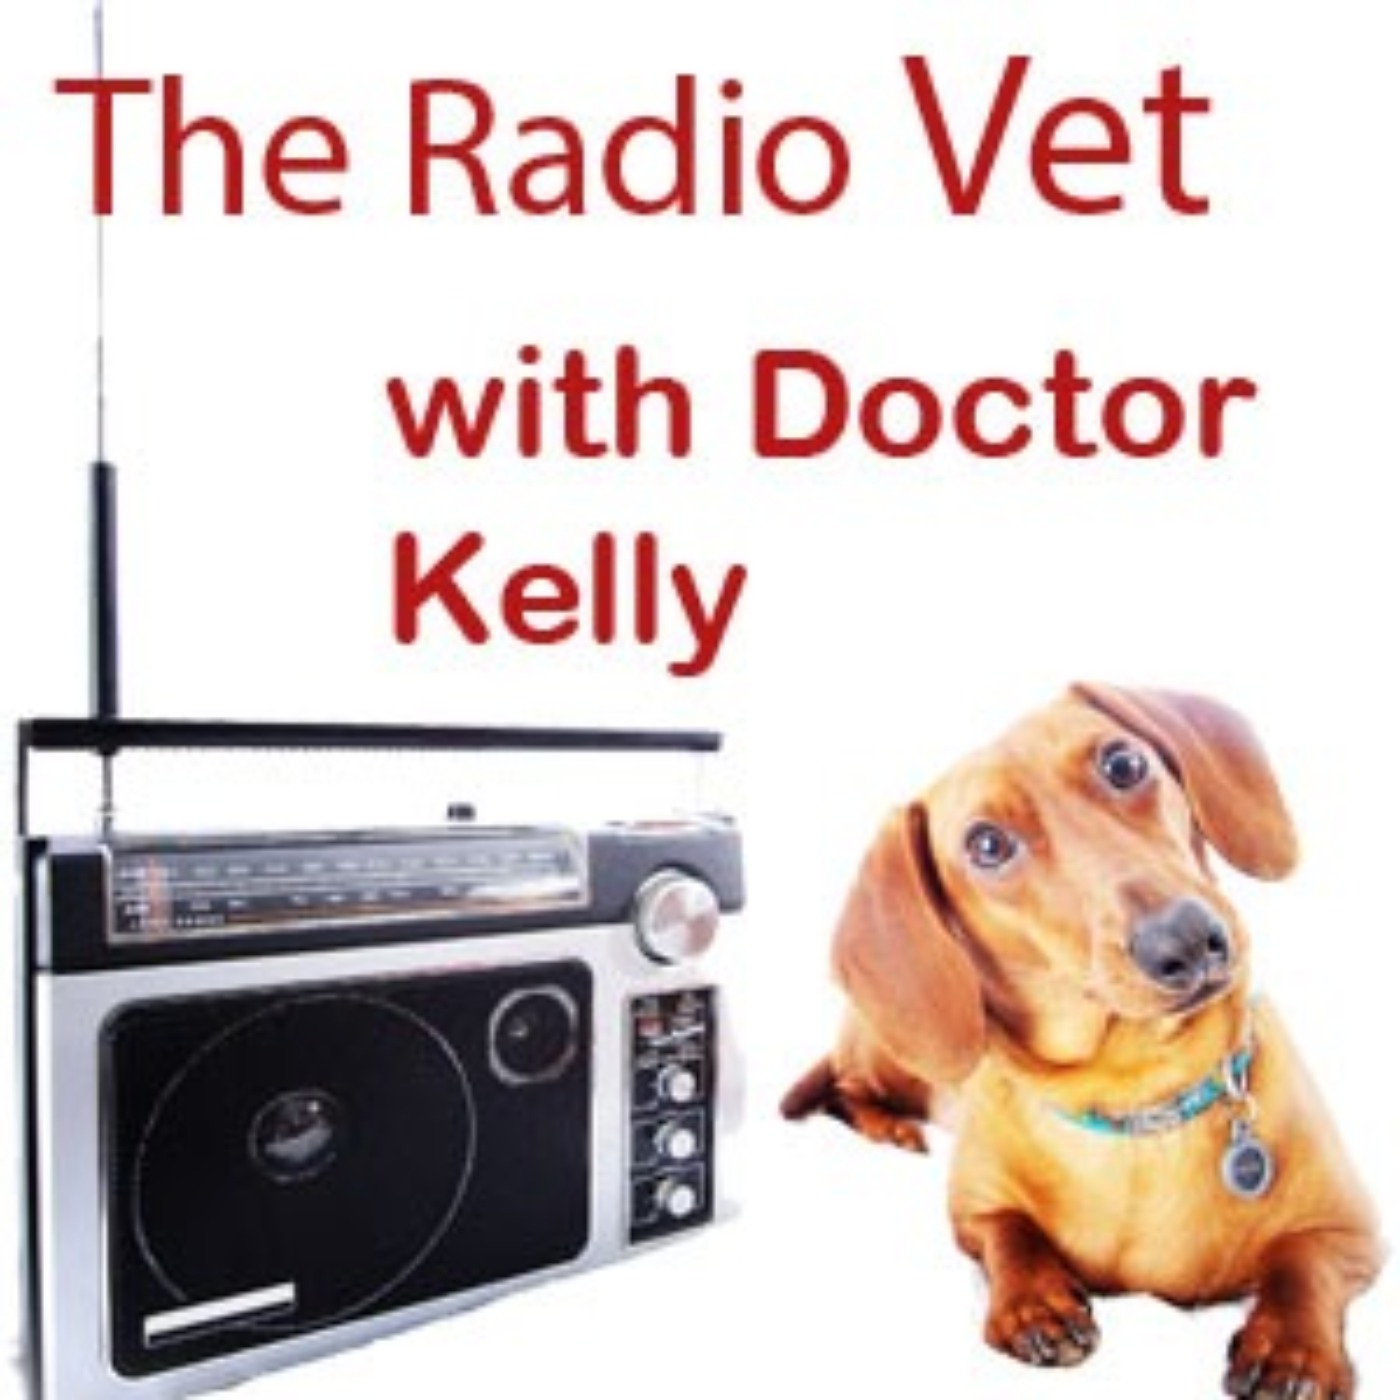 The Radio Vet with Doctor Kelly - "The Big C"